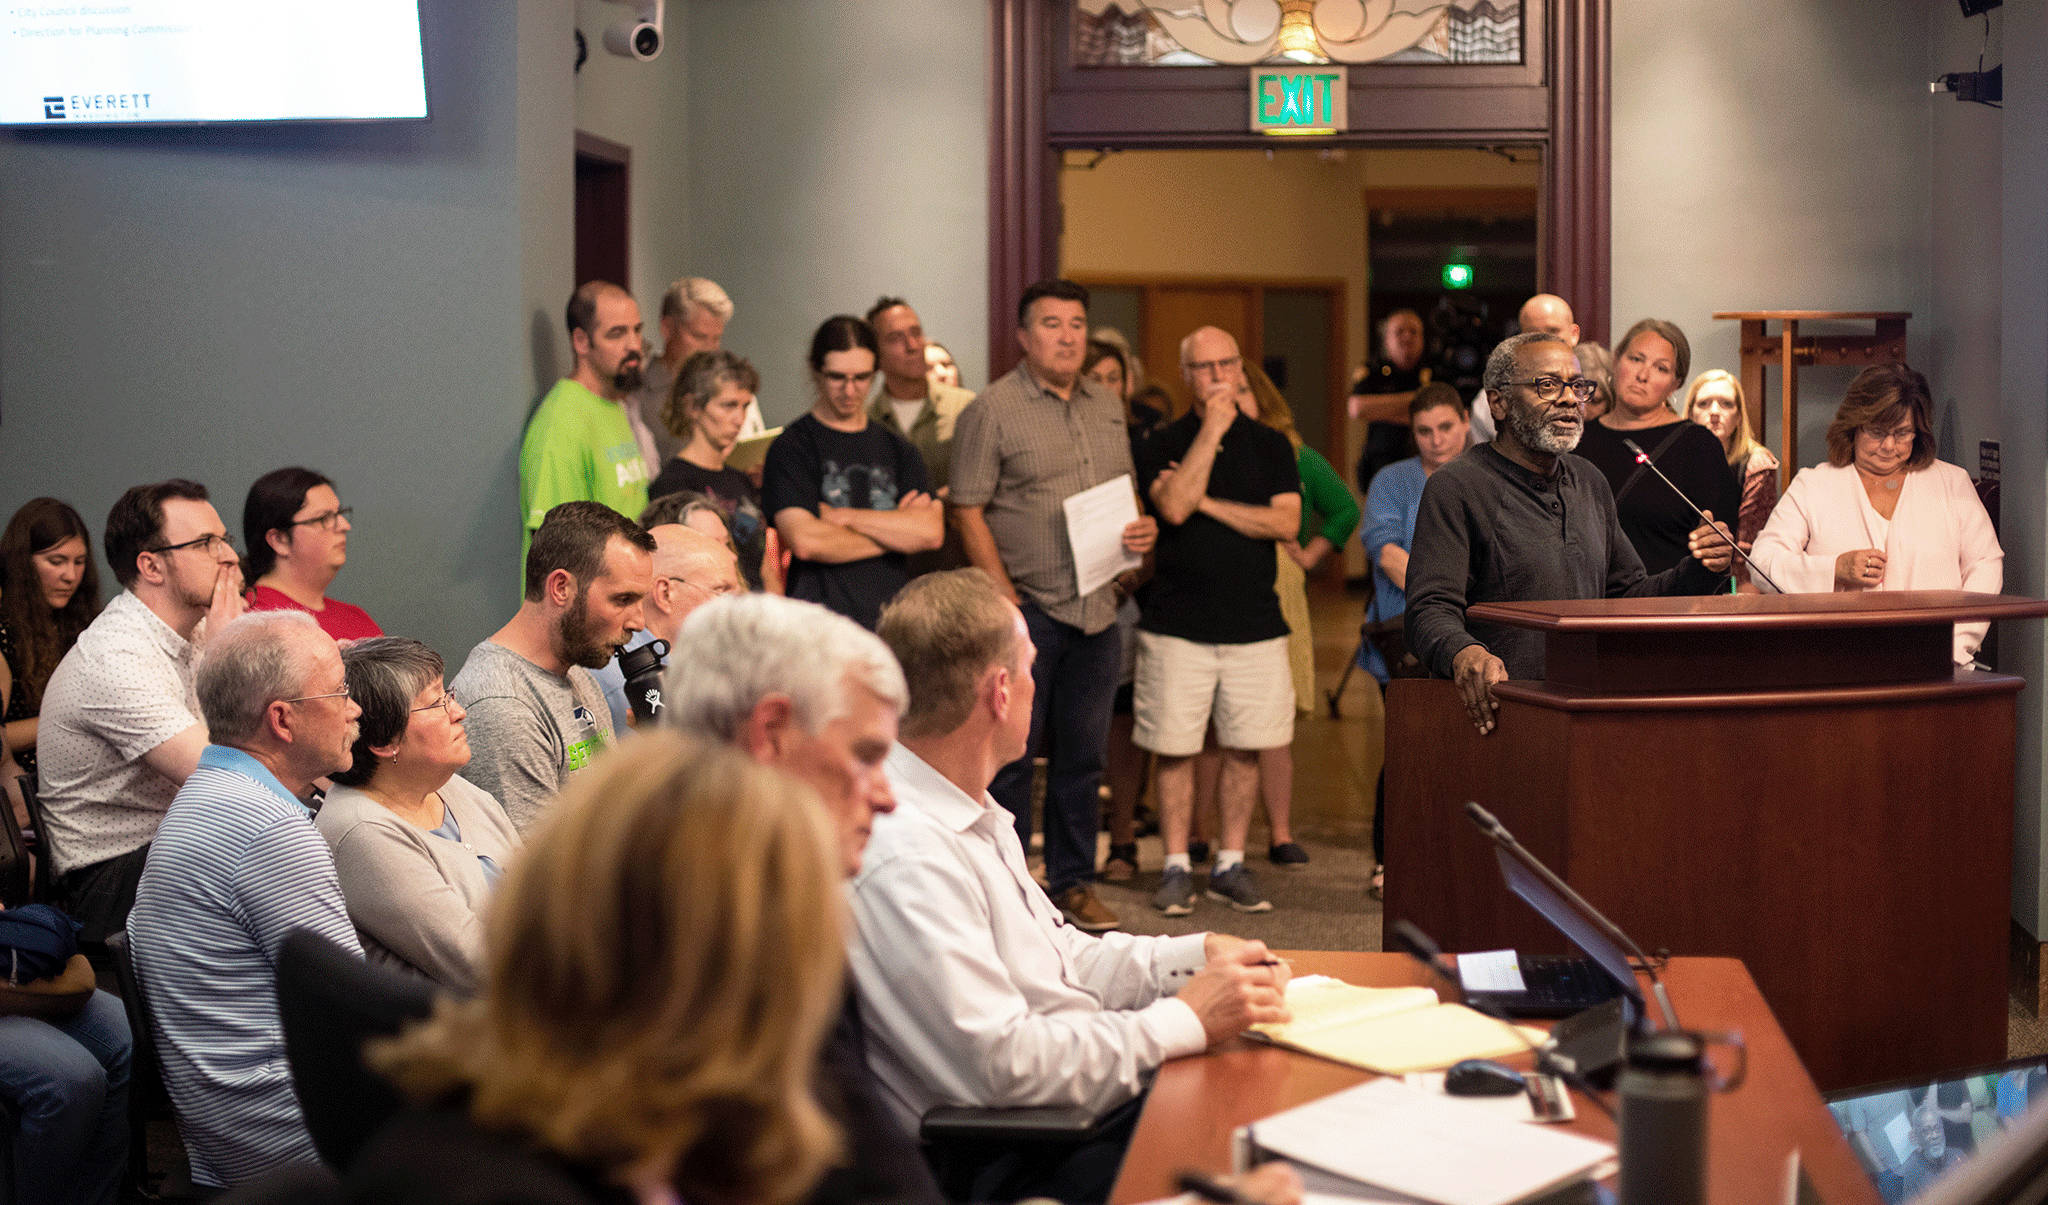 Supporters and opponents of a moratorium on supportive housing in single-family areas packed the Everett City Council chambers during a public hearing Wednesday night. (Lizz Giordano / The Herald)